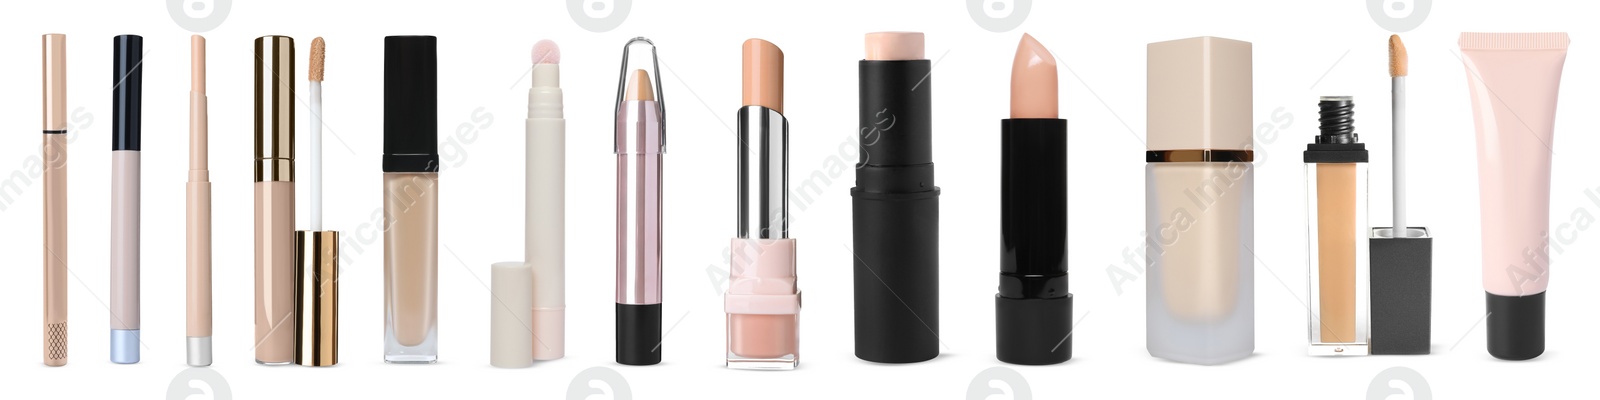 Image of Concealers, correctors and liquid foundations isolated on white. Collection of makeup products